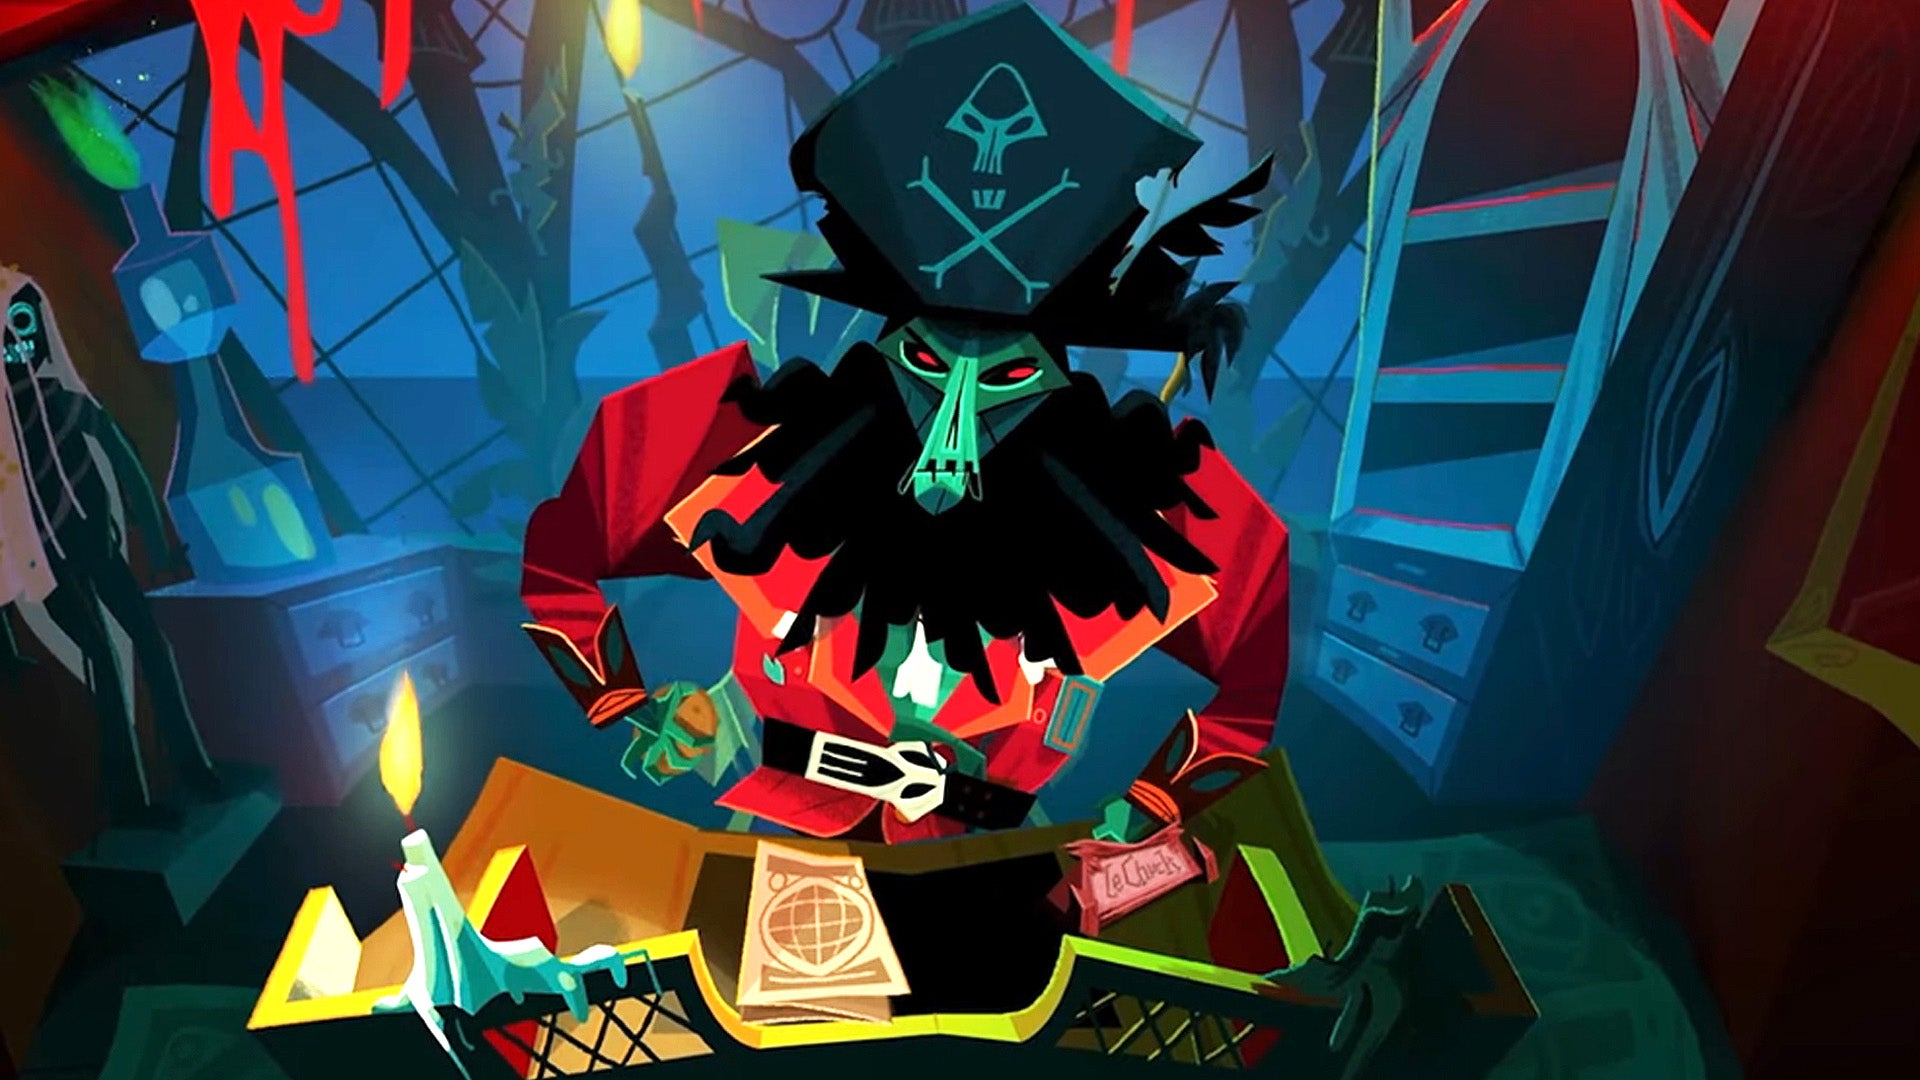 The Blackbeard-like skeleton pirate enemy LeChuck in Return to Monkey Island, standing over a table in a spooky cabin, glaring at the camera.